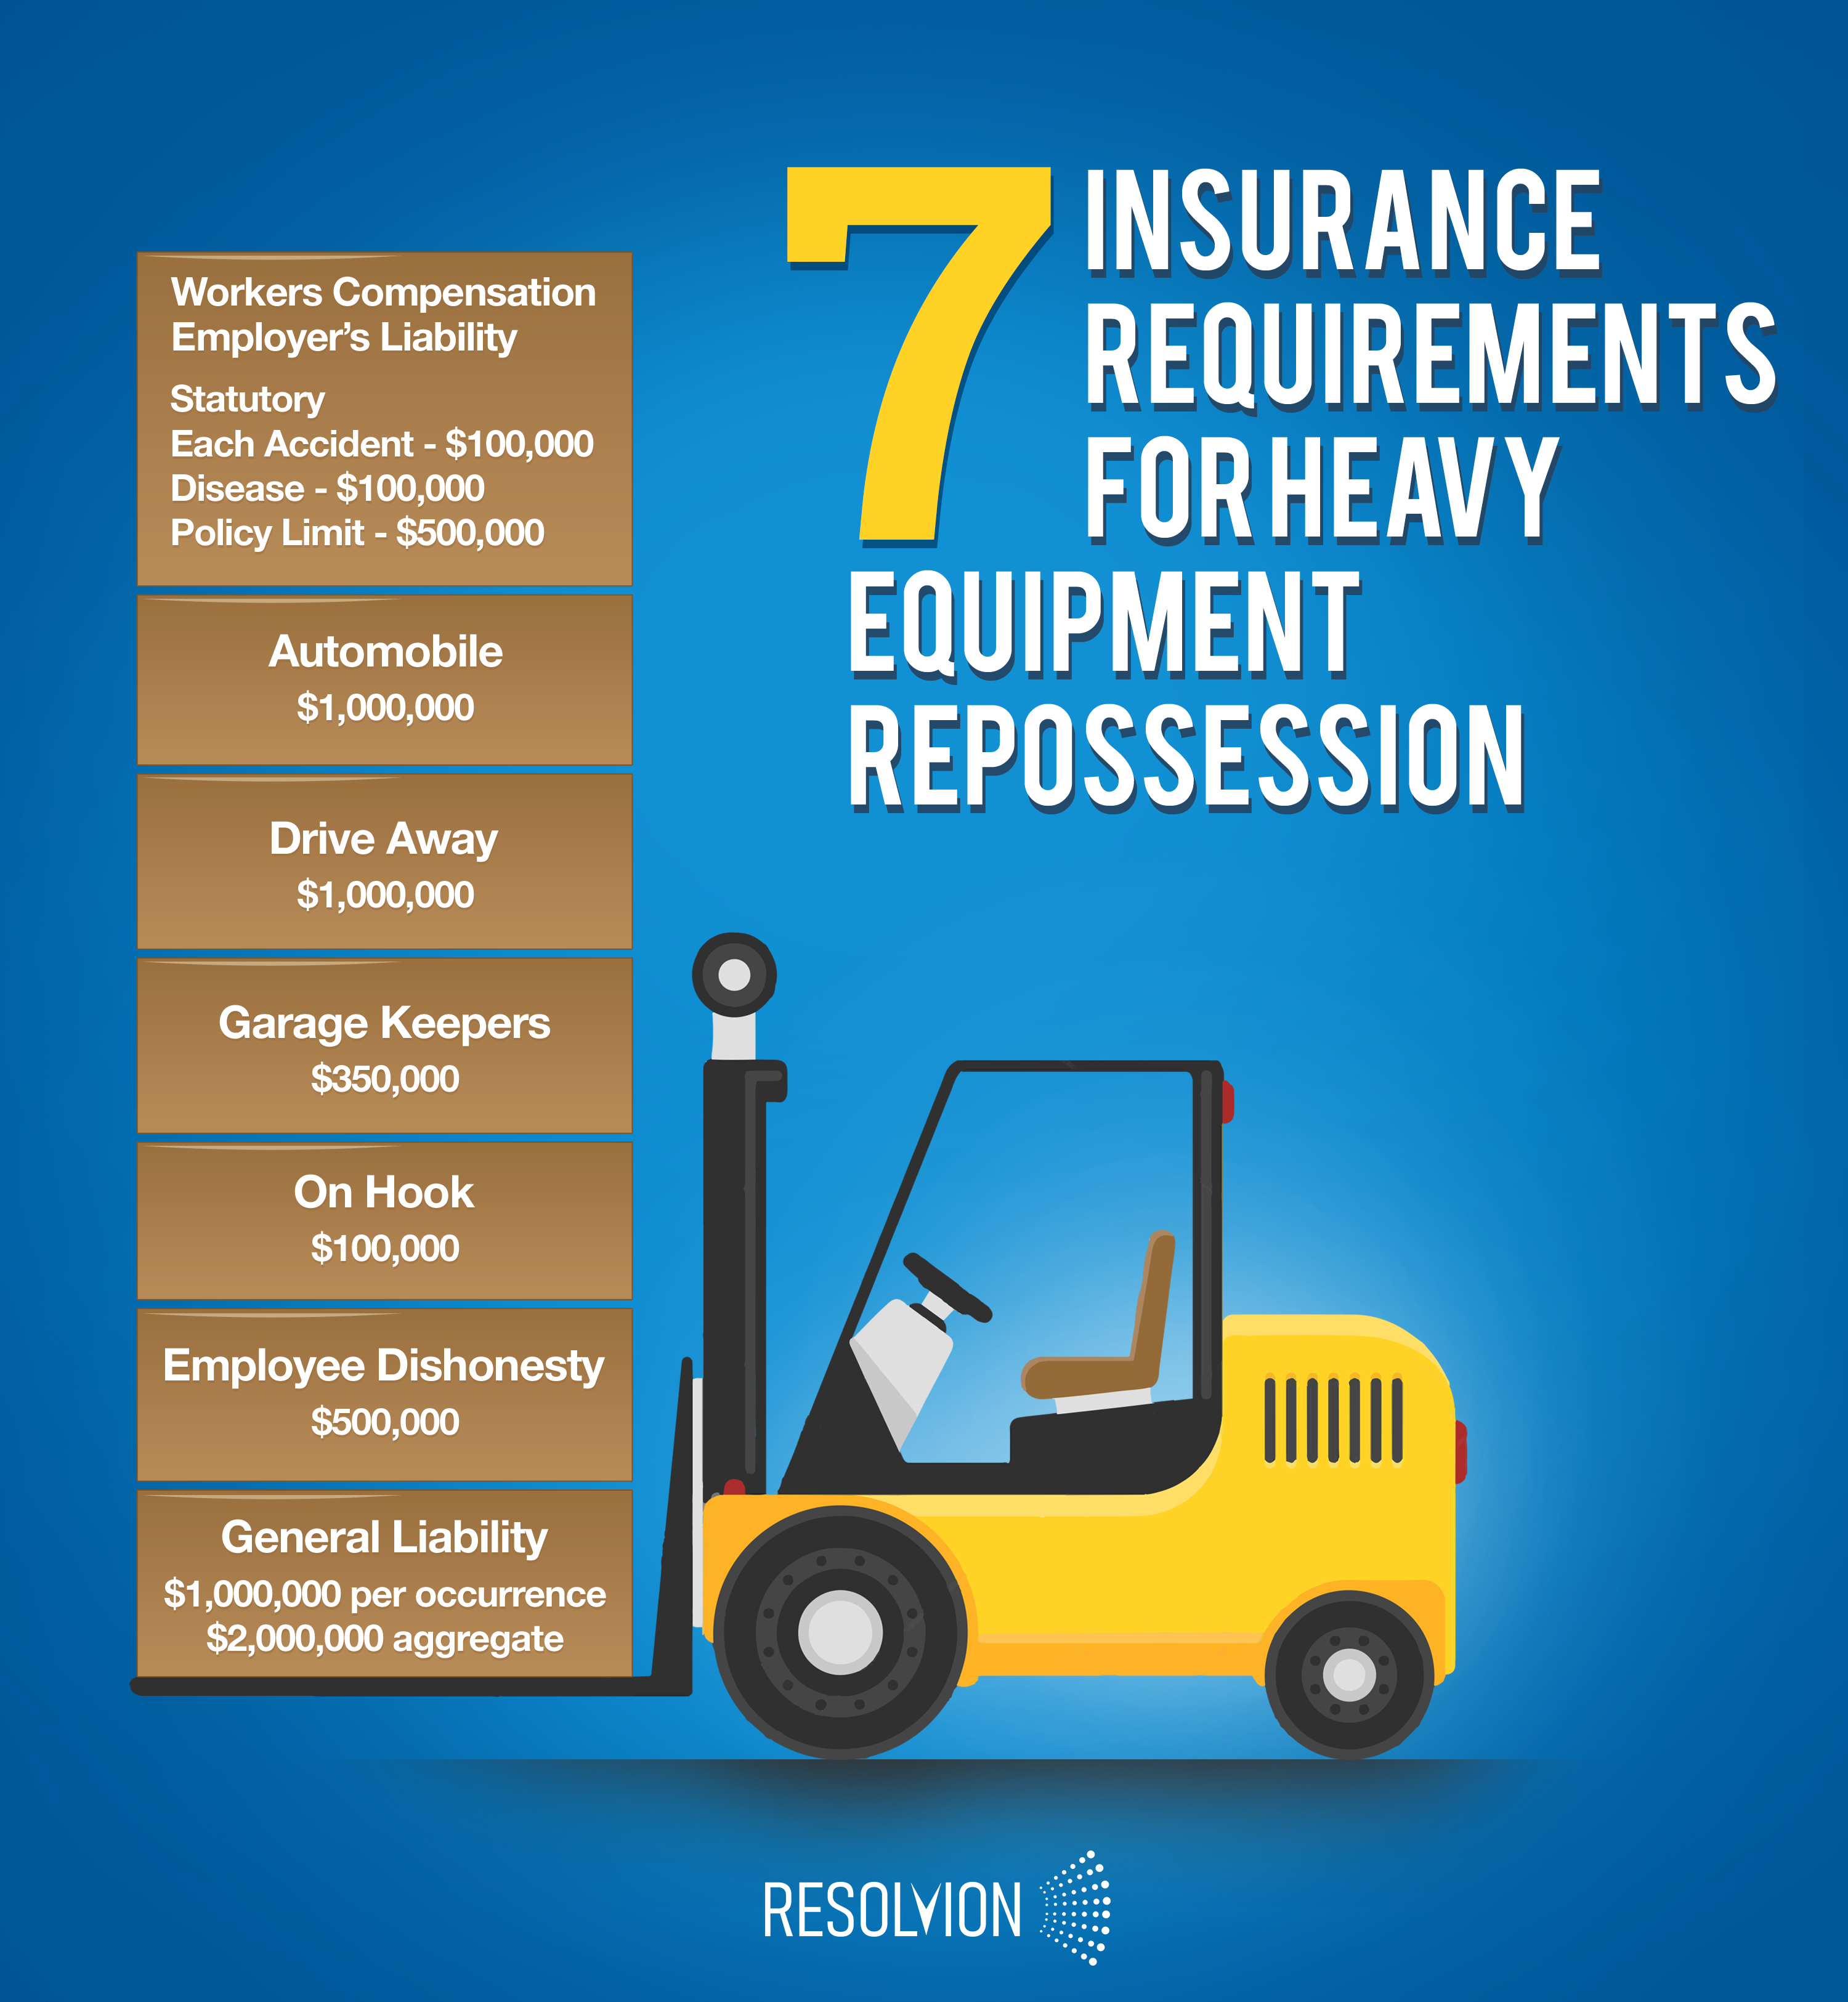 7 Insurance Requirements For Heavy Equipment Repossession